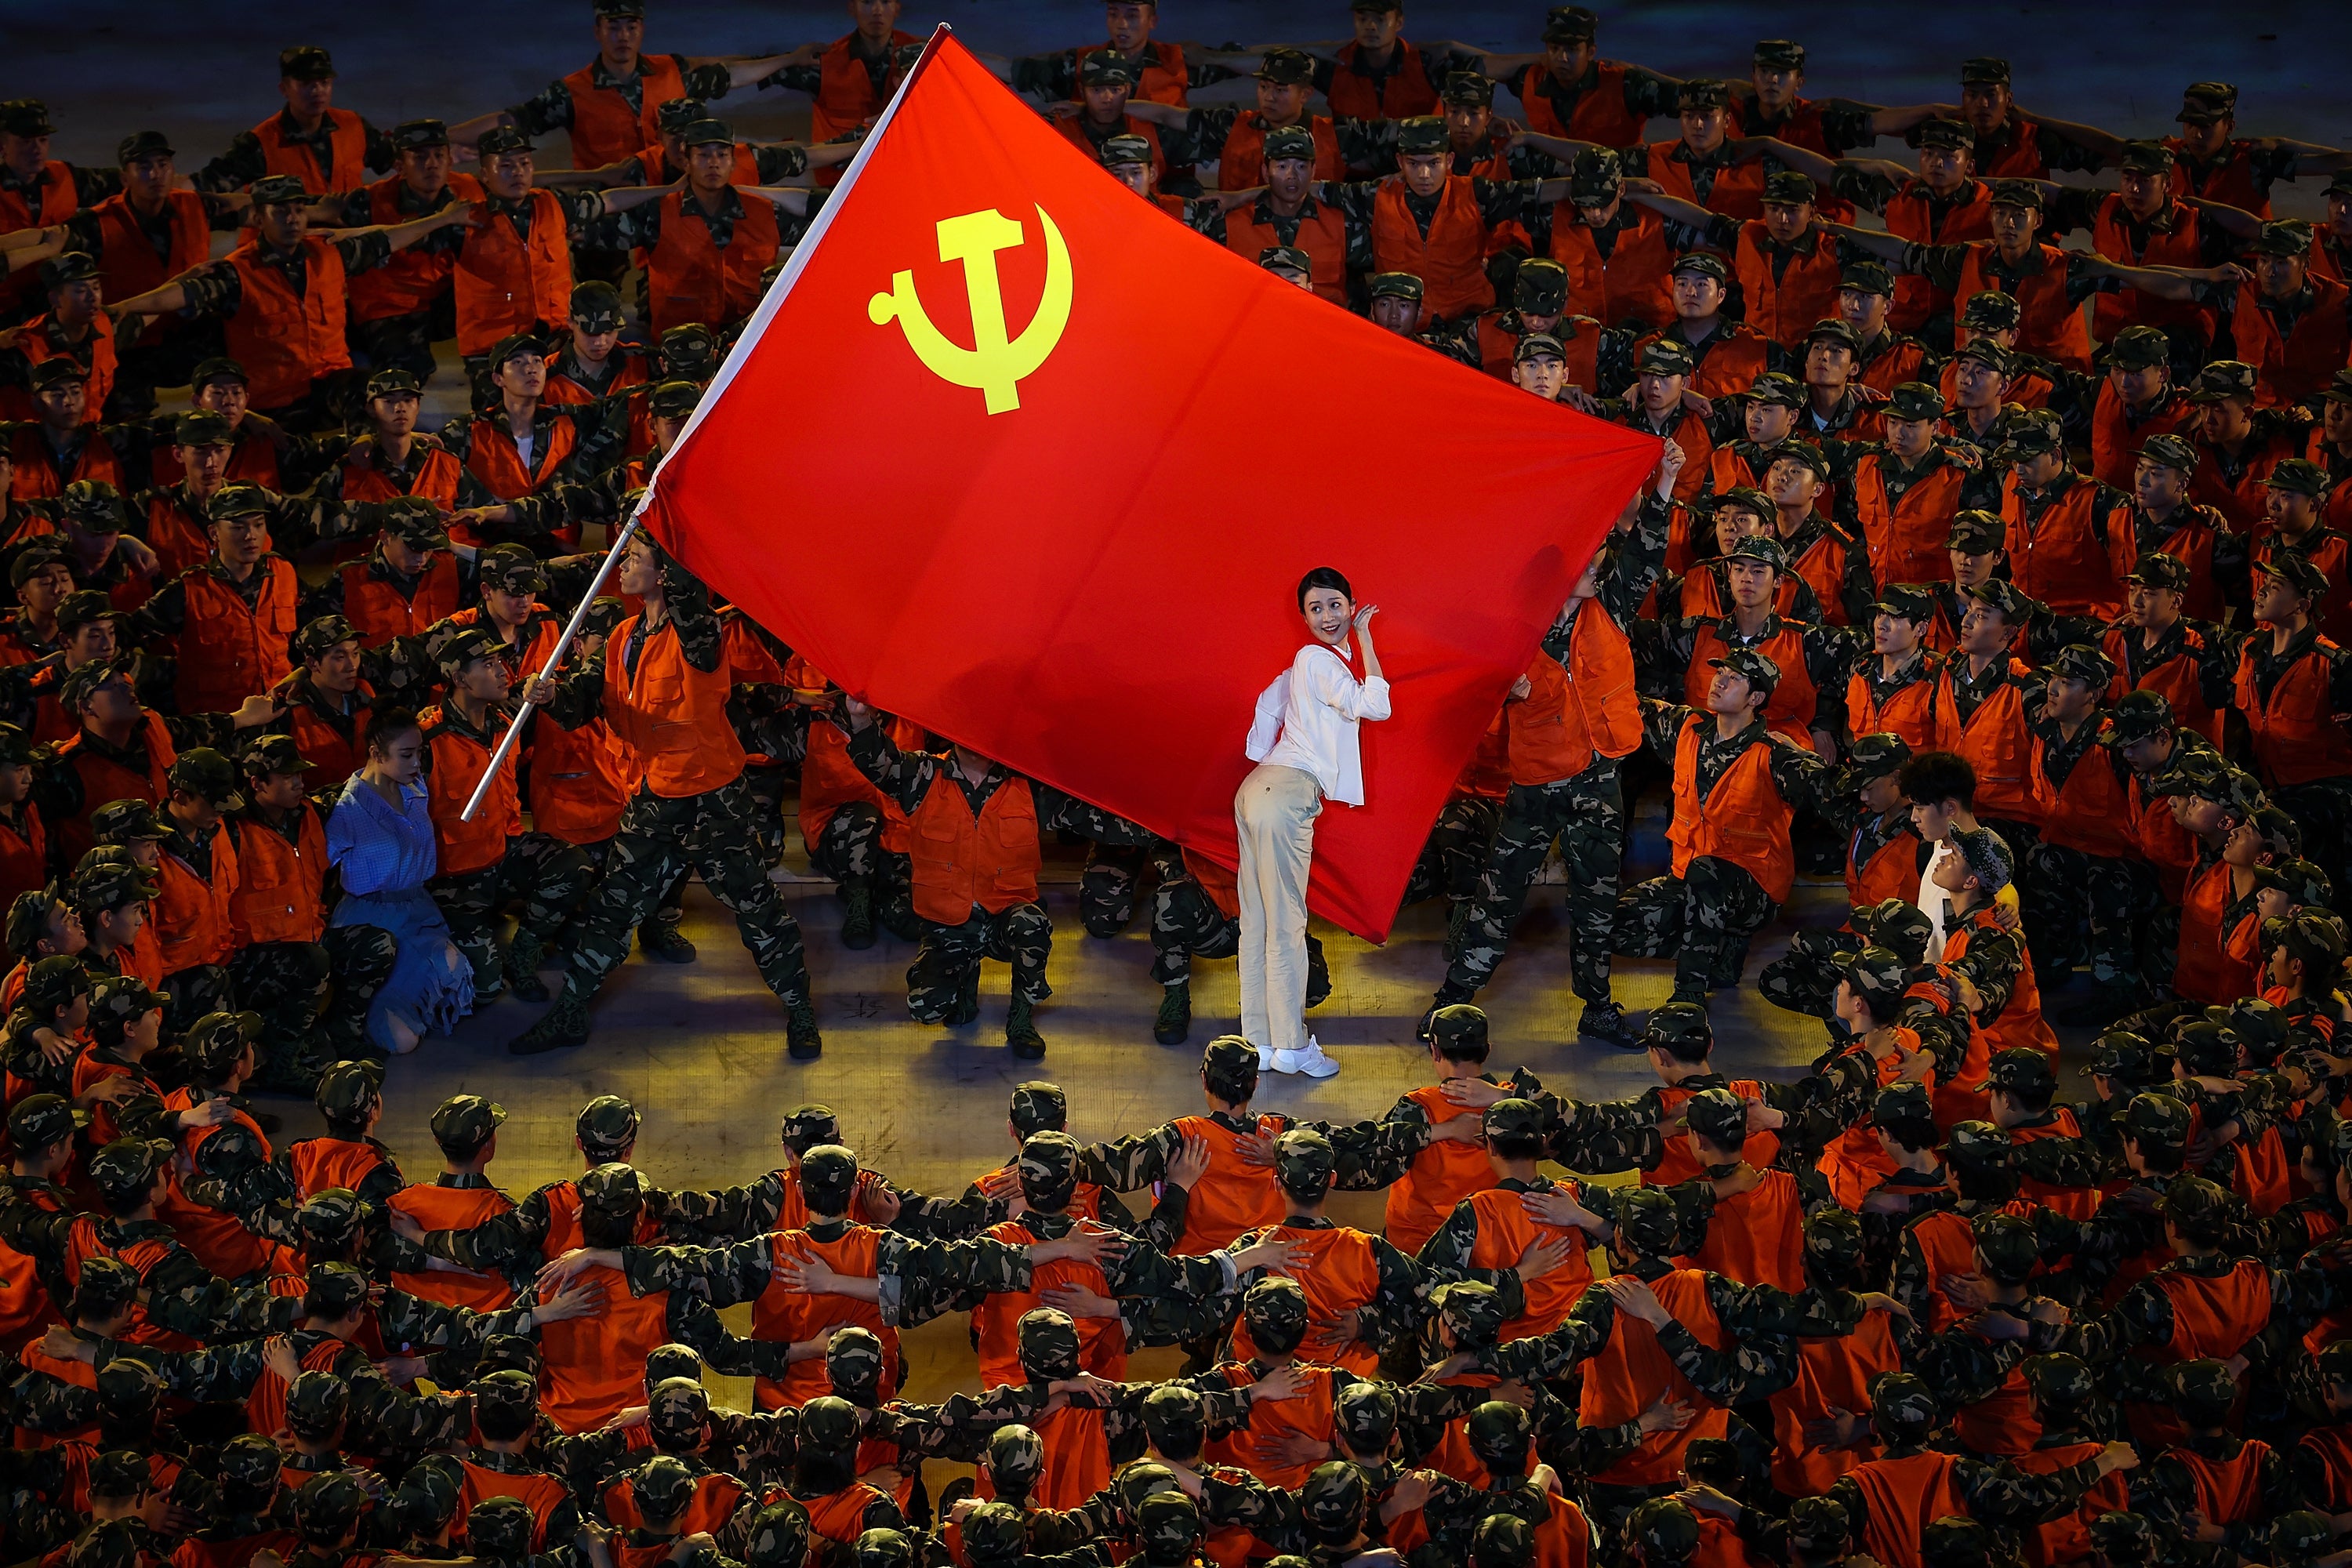 Xi pledged to unify Taiwan with mainland China during the celebrations of the 100th anniversary of the Communist Party